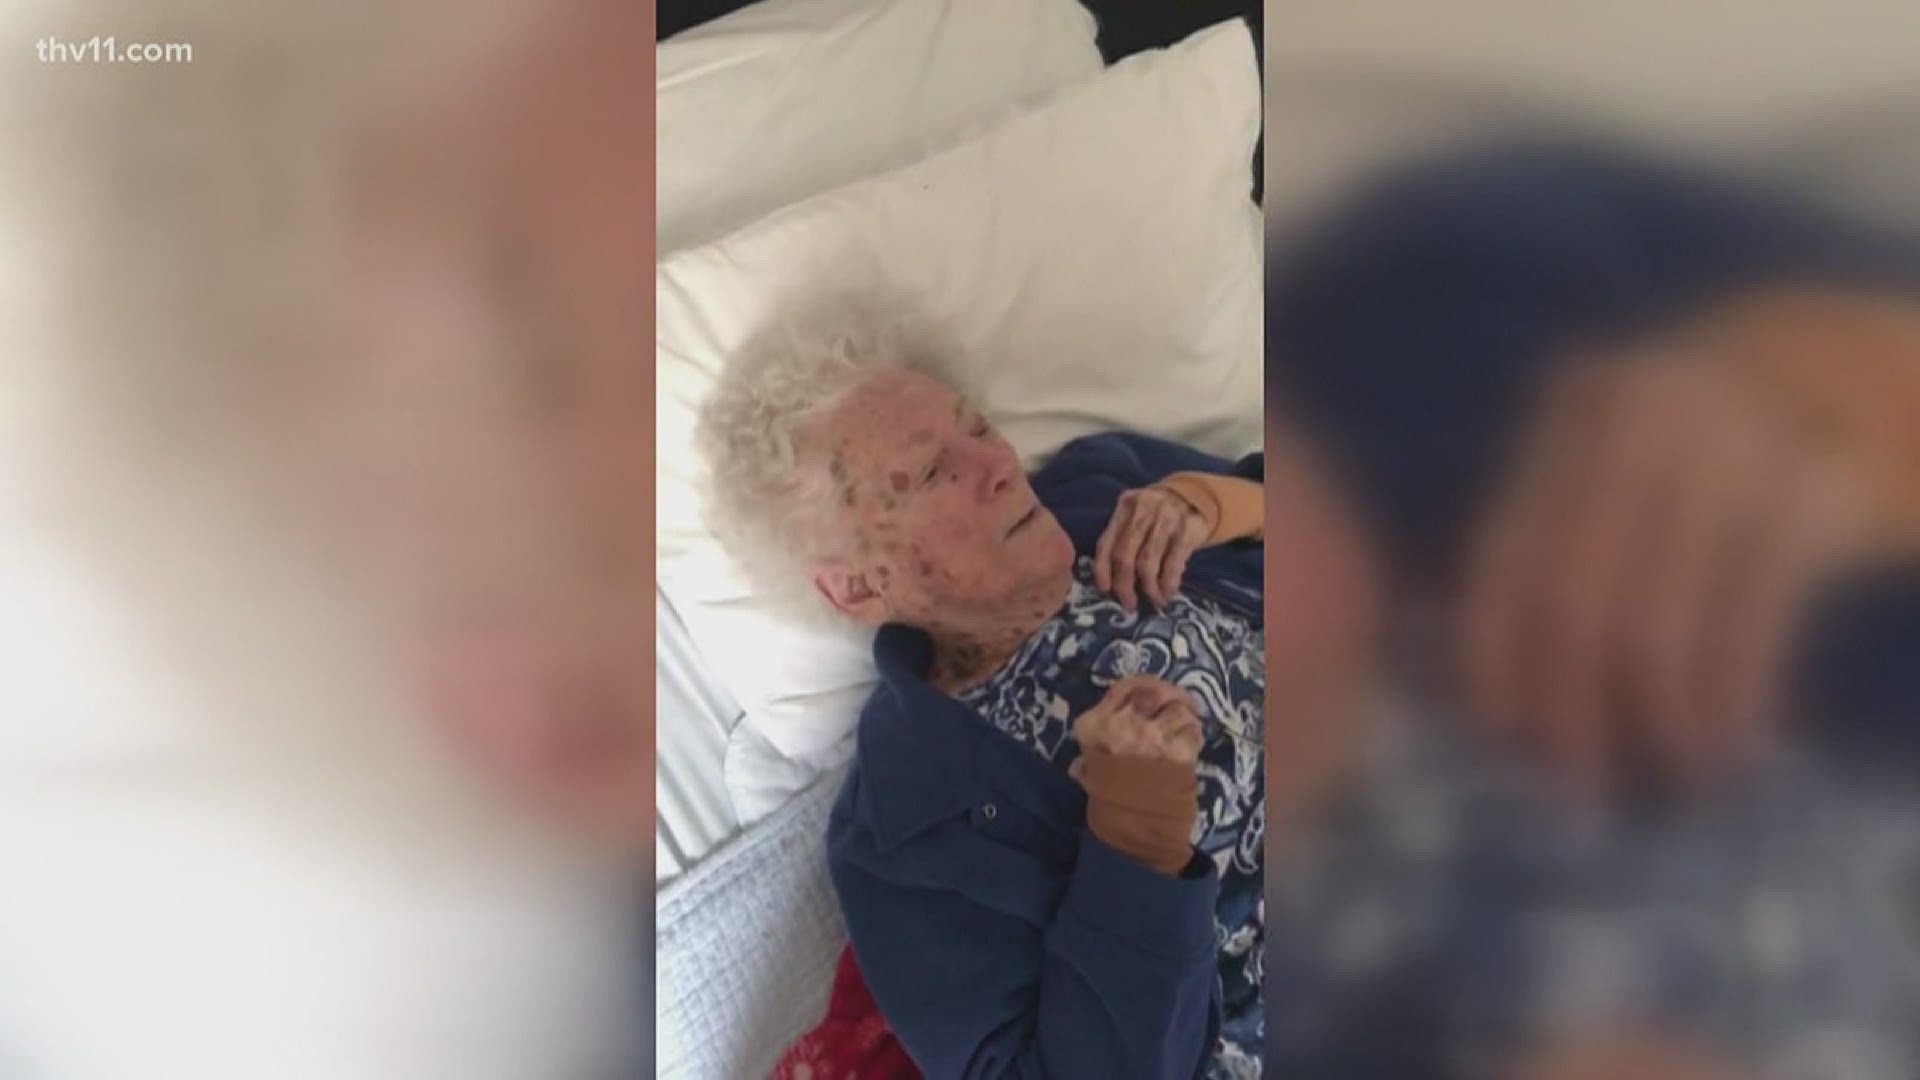 It was devastating to learn that COVID-19 spread through a nursing home. But with a lot of fight and a lot of faith, a 99-year-old woman is on her way to recovery.